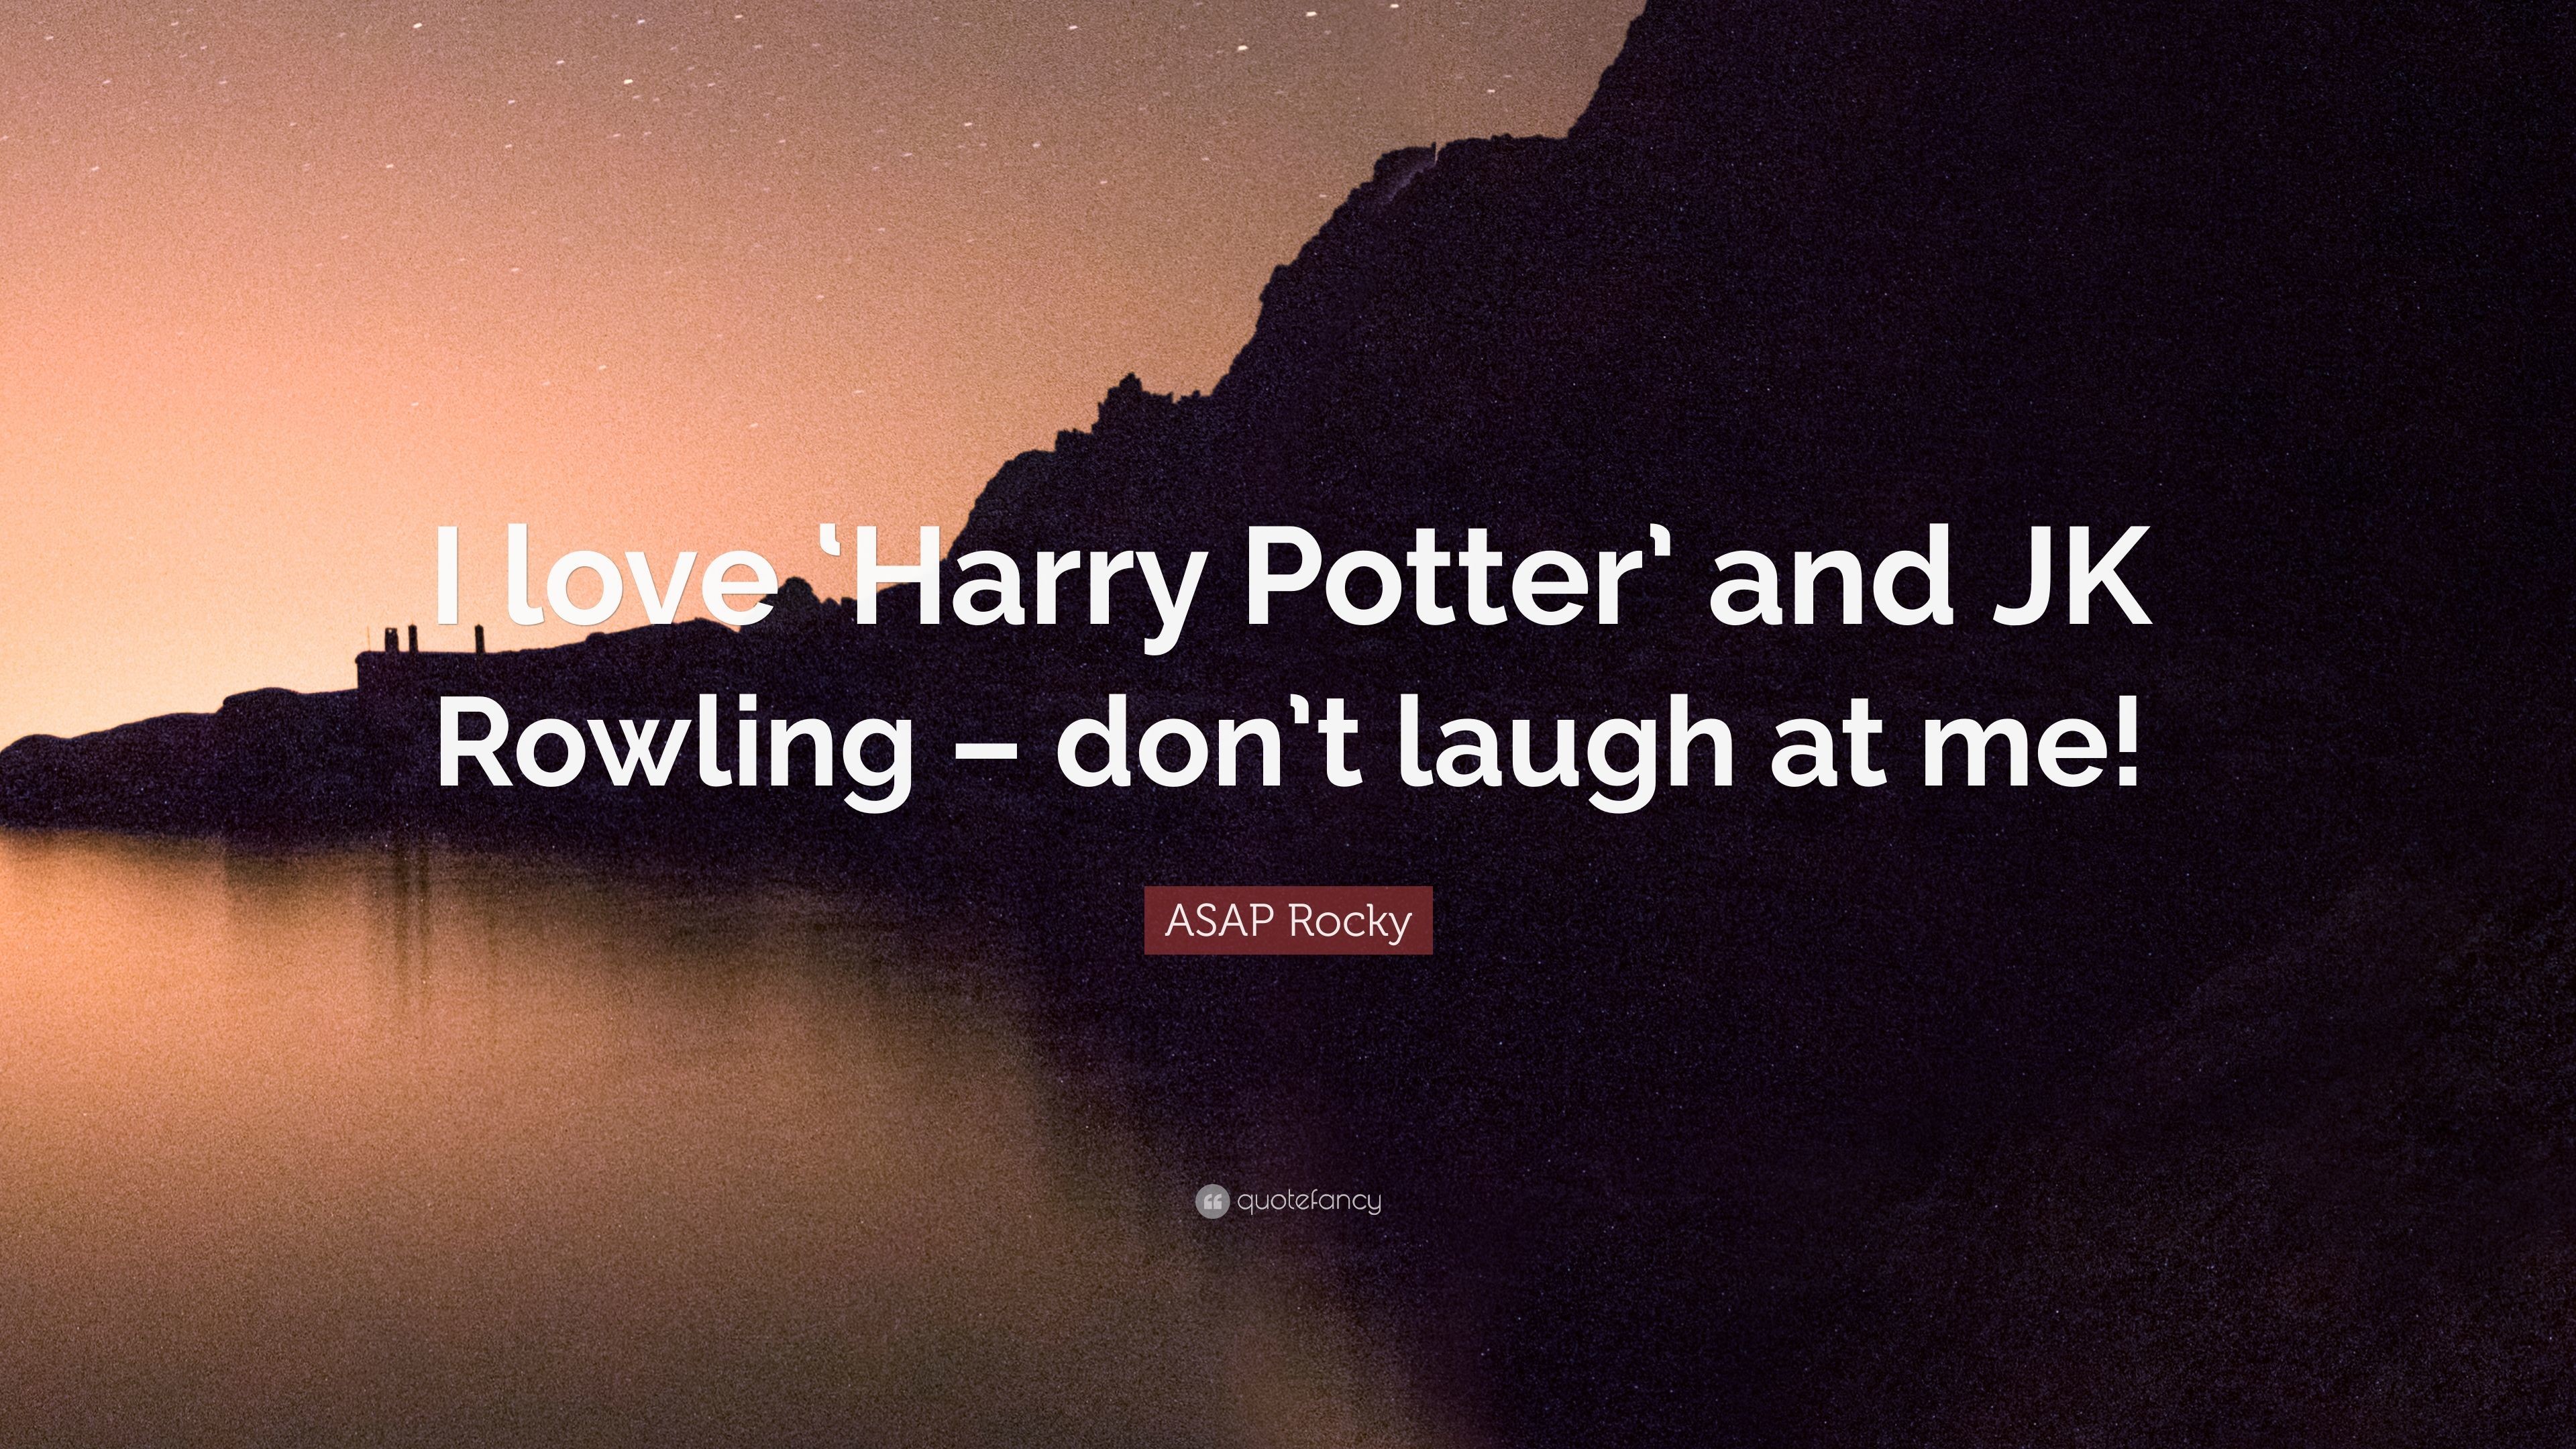 3840x2160 ASAP Rocky Quote: “I love 'Harry Potter' and JK Rowling – don